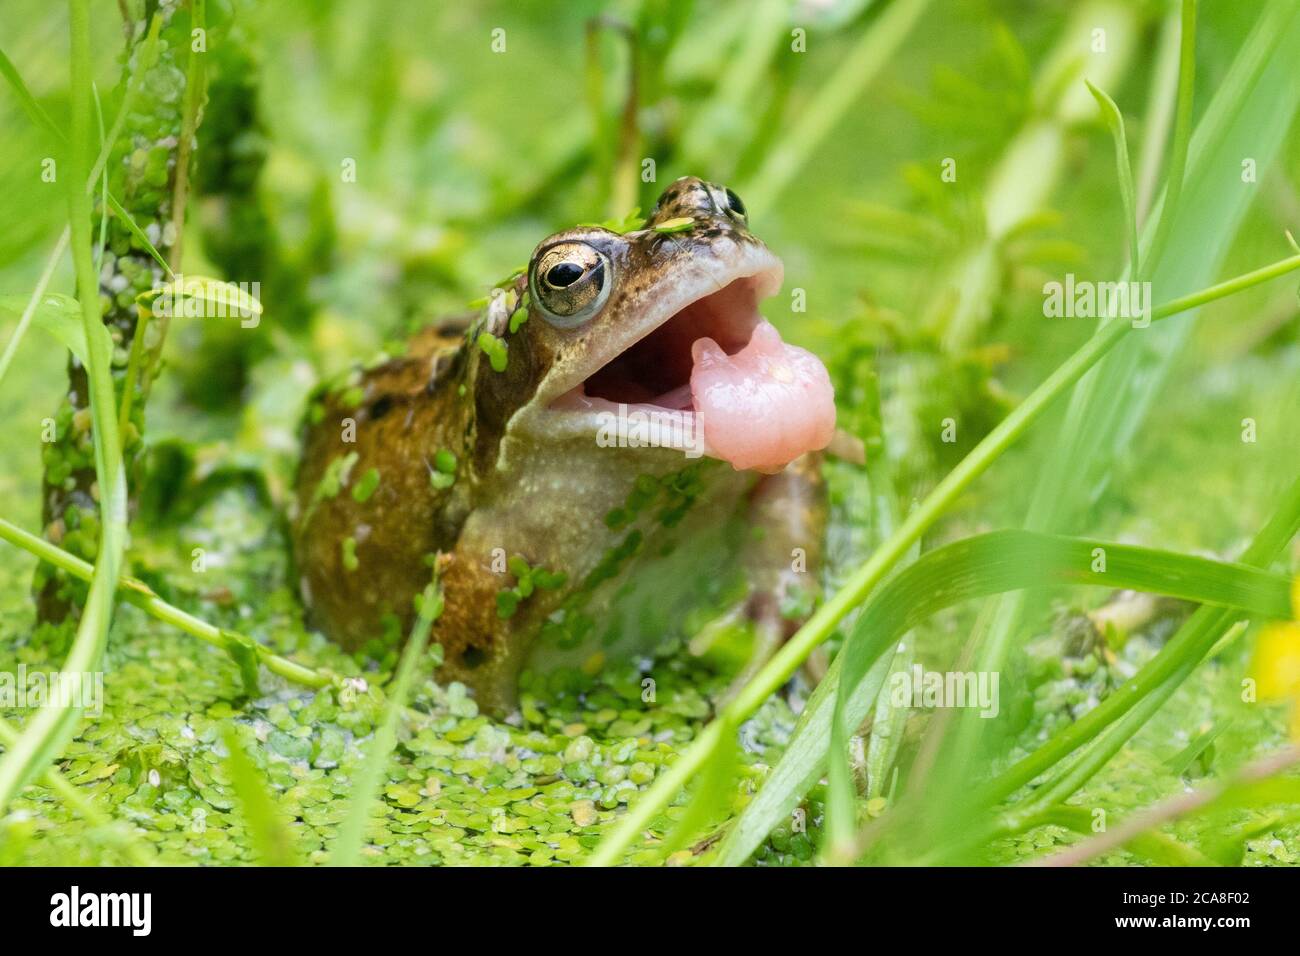 Common frog (Rana temporaria) in uk garden wildlife pond covered in duckweed with mouth open after trying to catch a wasp Stock Photo